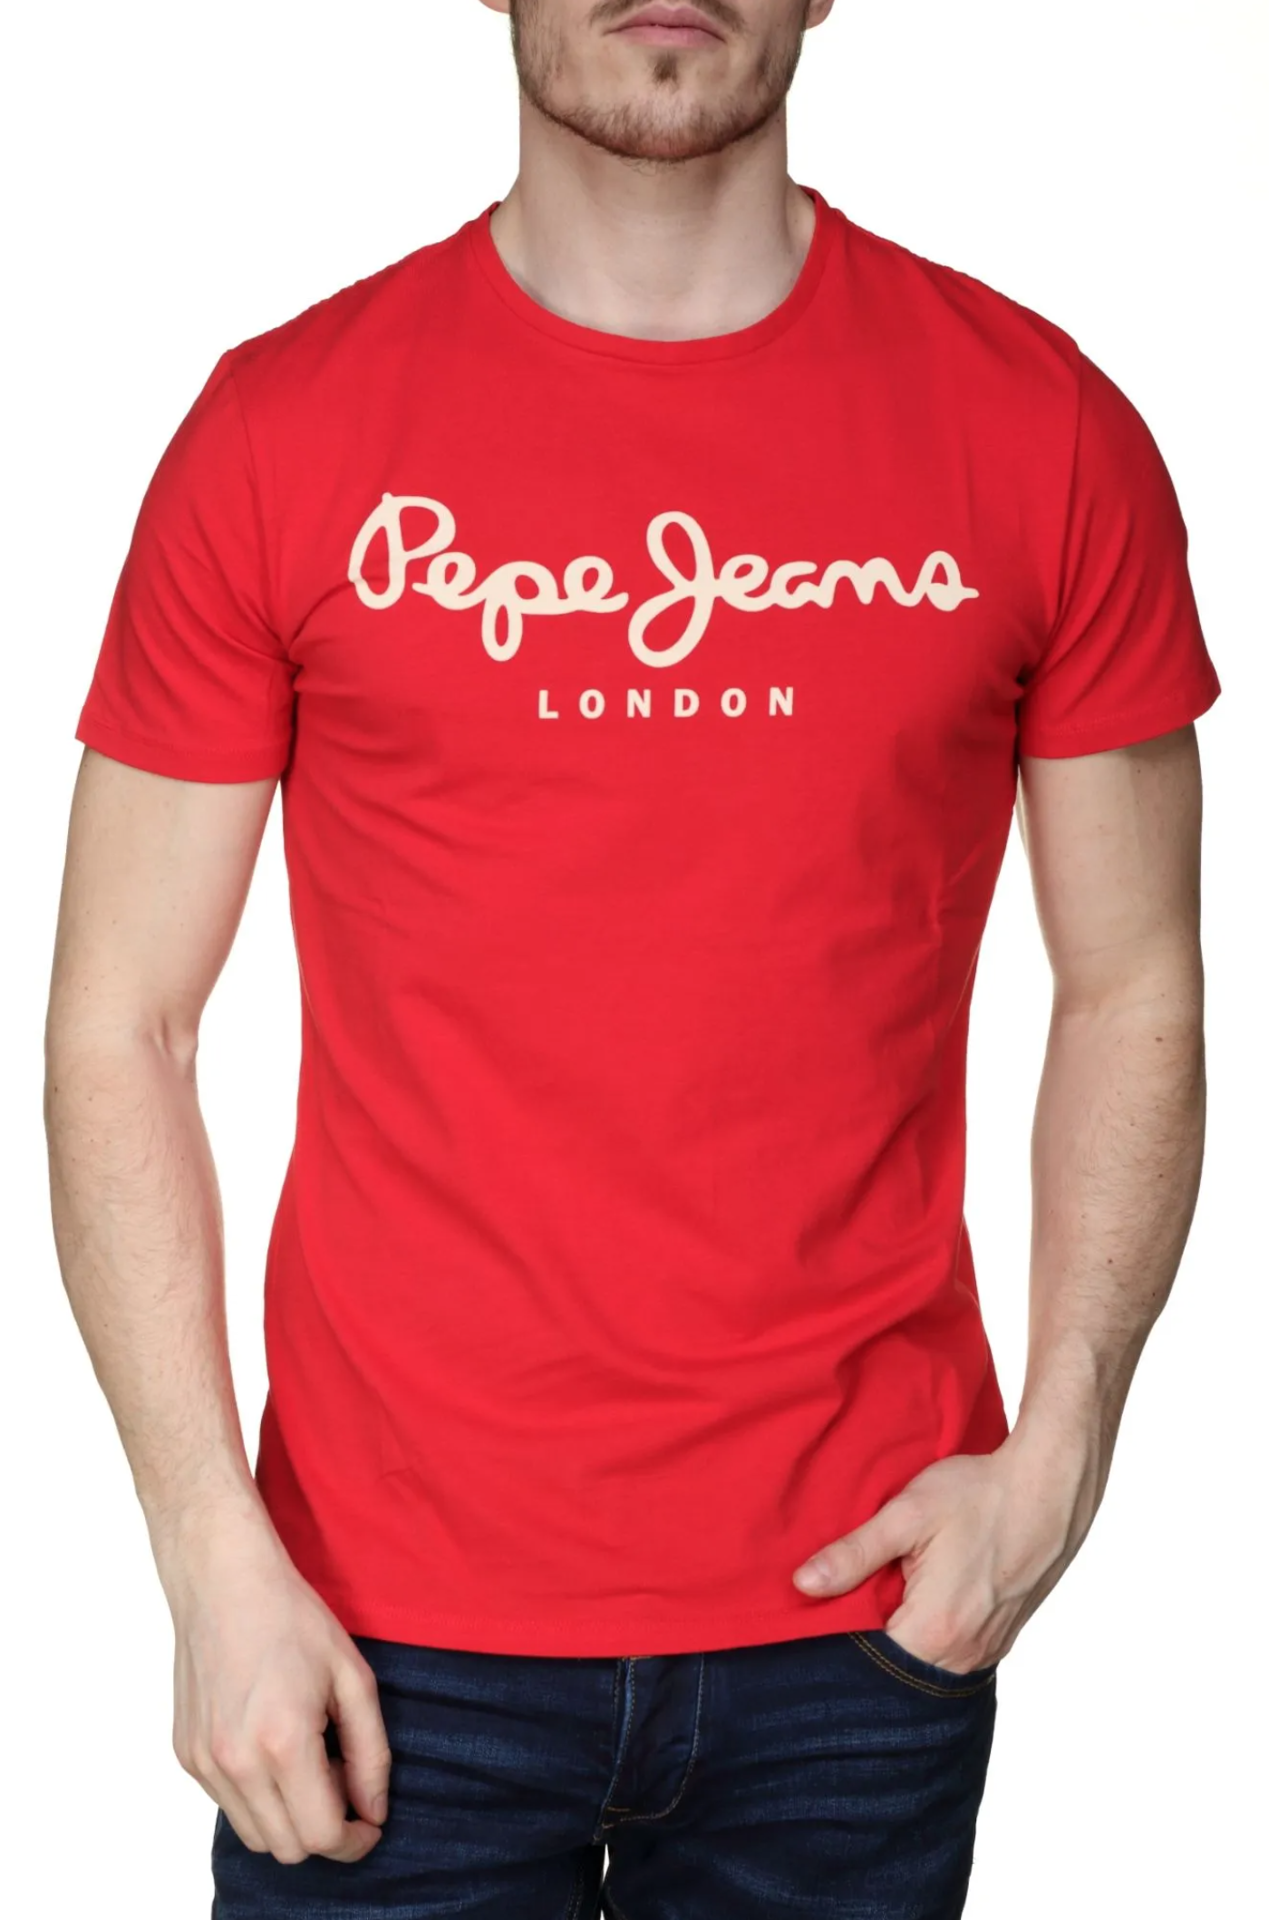 Pepe Jeans London Red Bull T-Shirt Size L